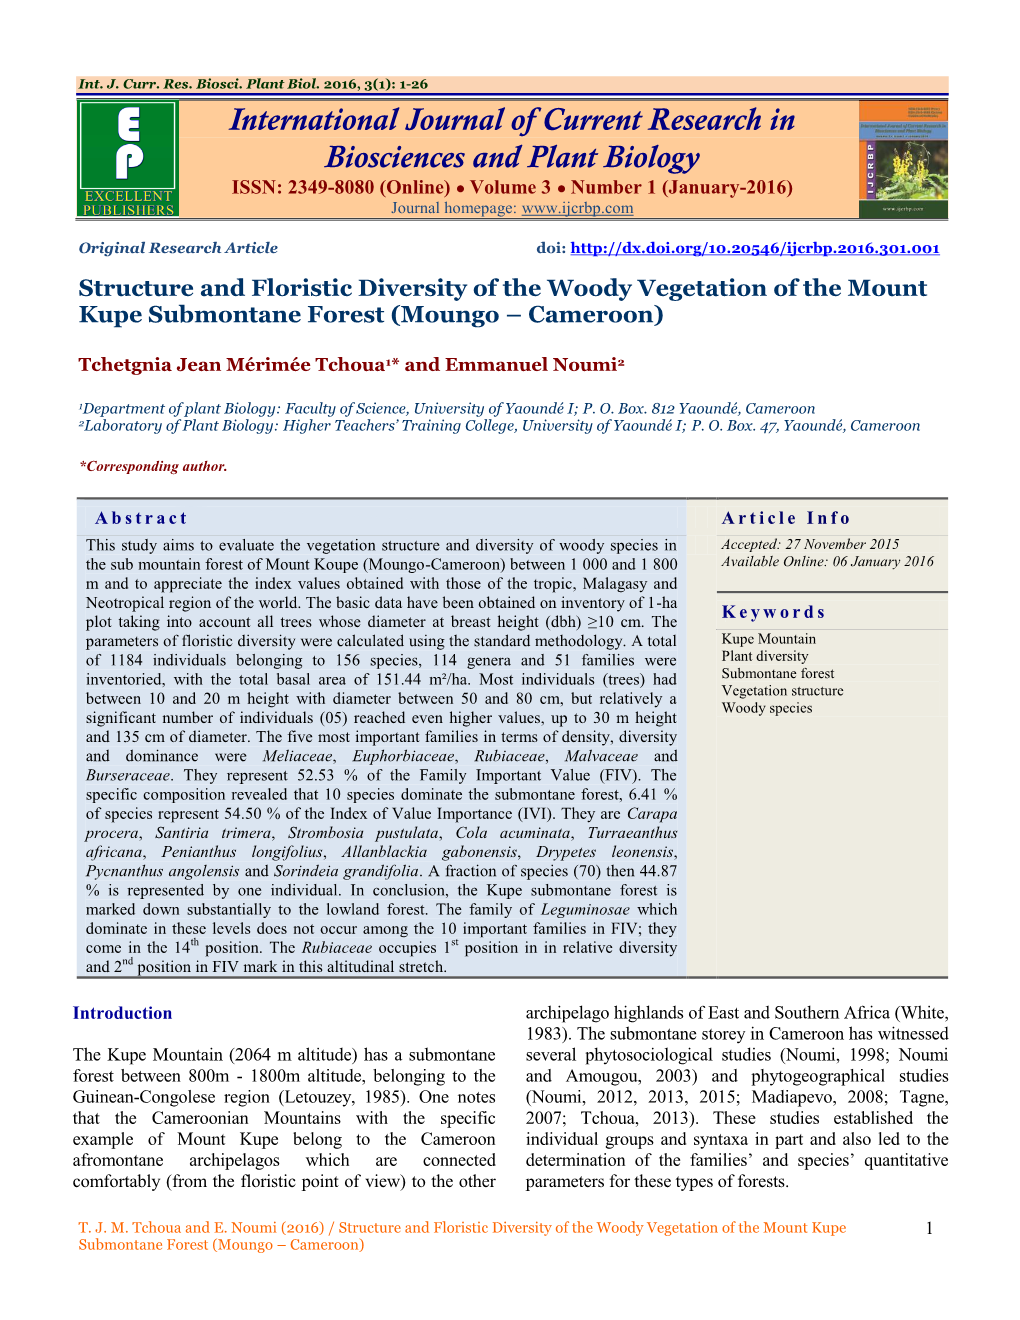 International Journal of Current Research in Biosciences and Plant